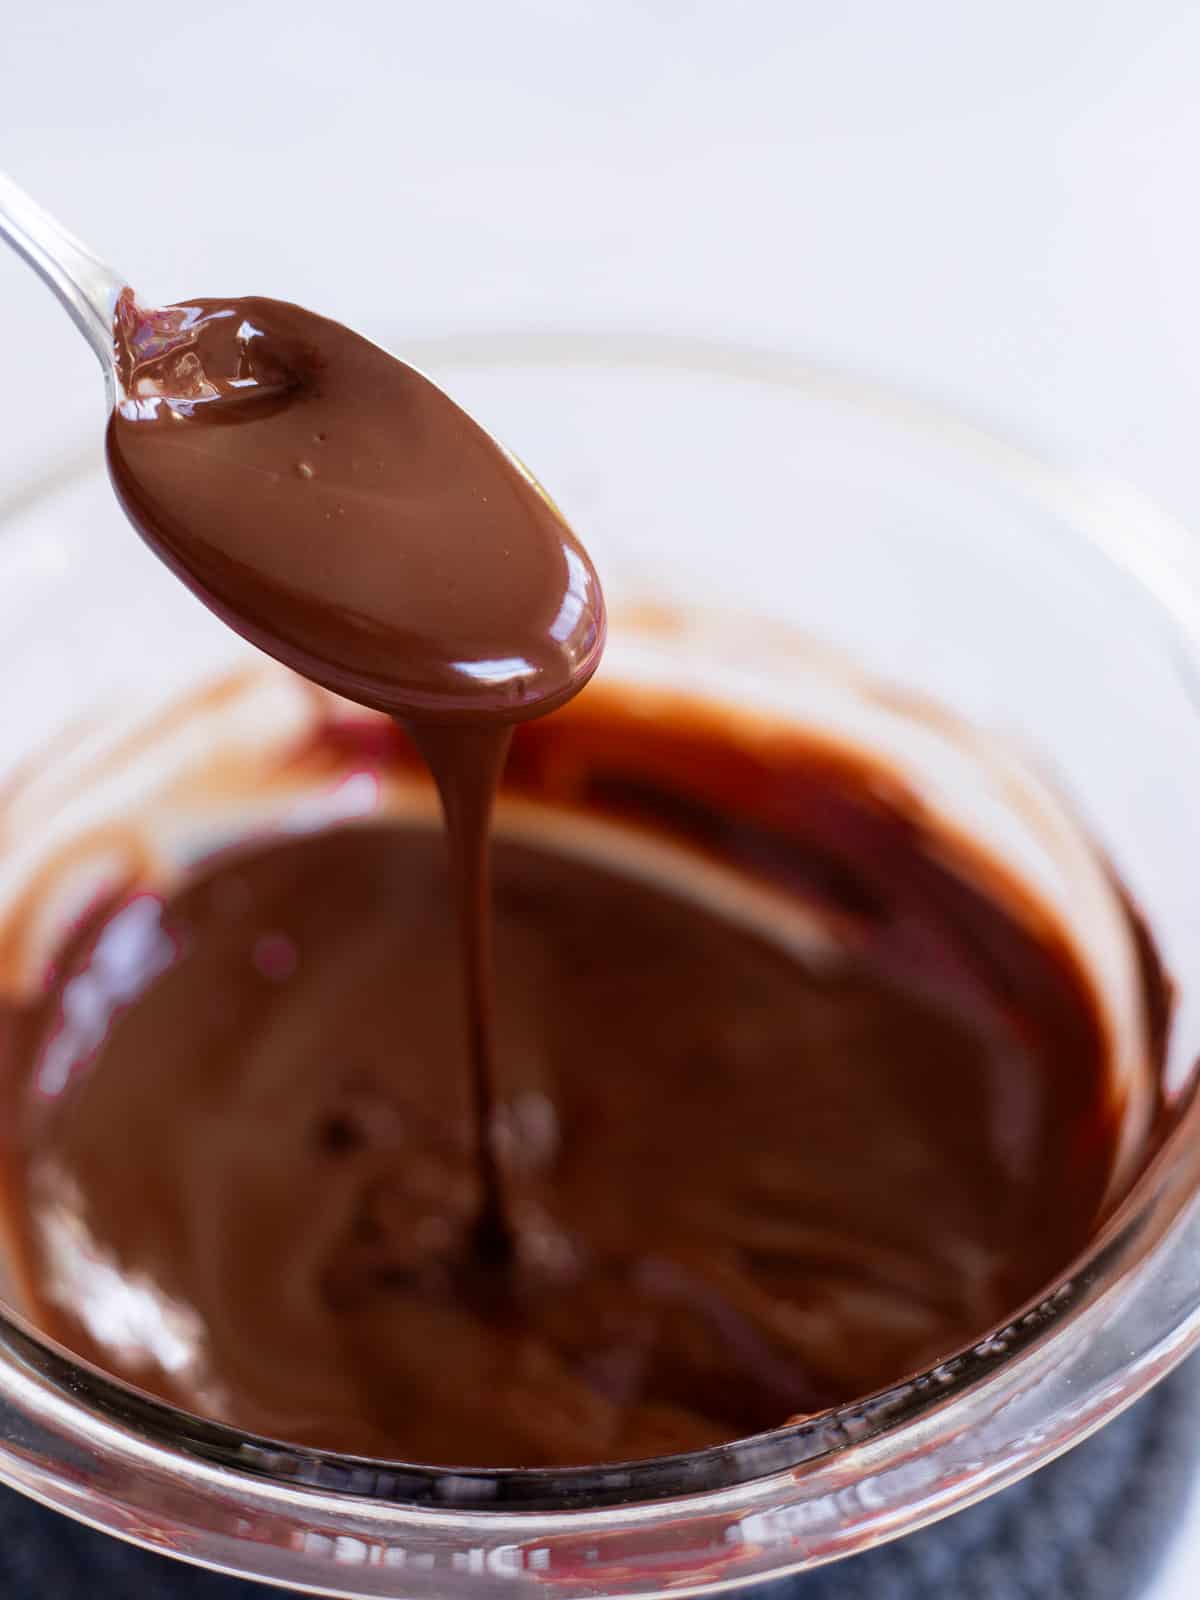 melted chocolate in a glass bowl dripping off a spoon.